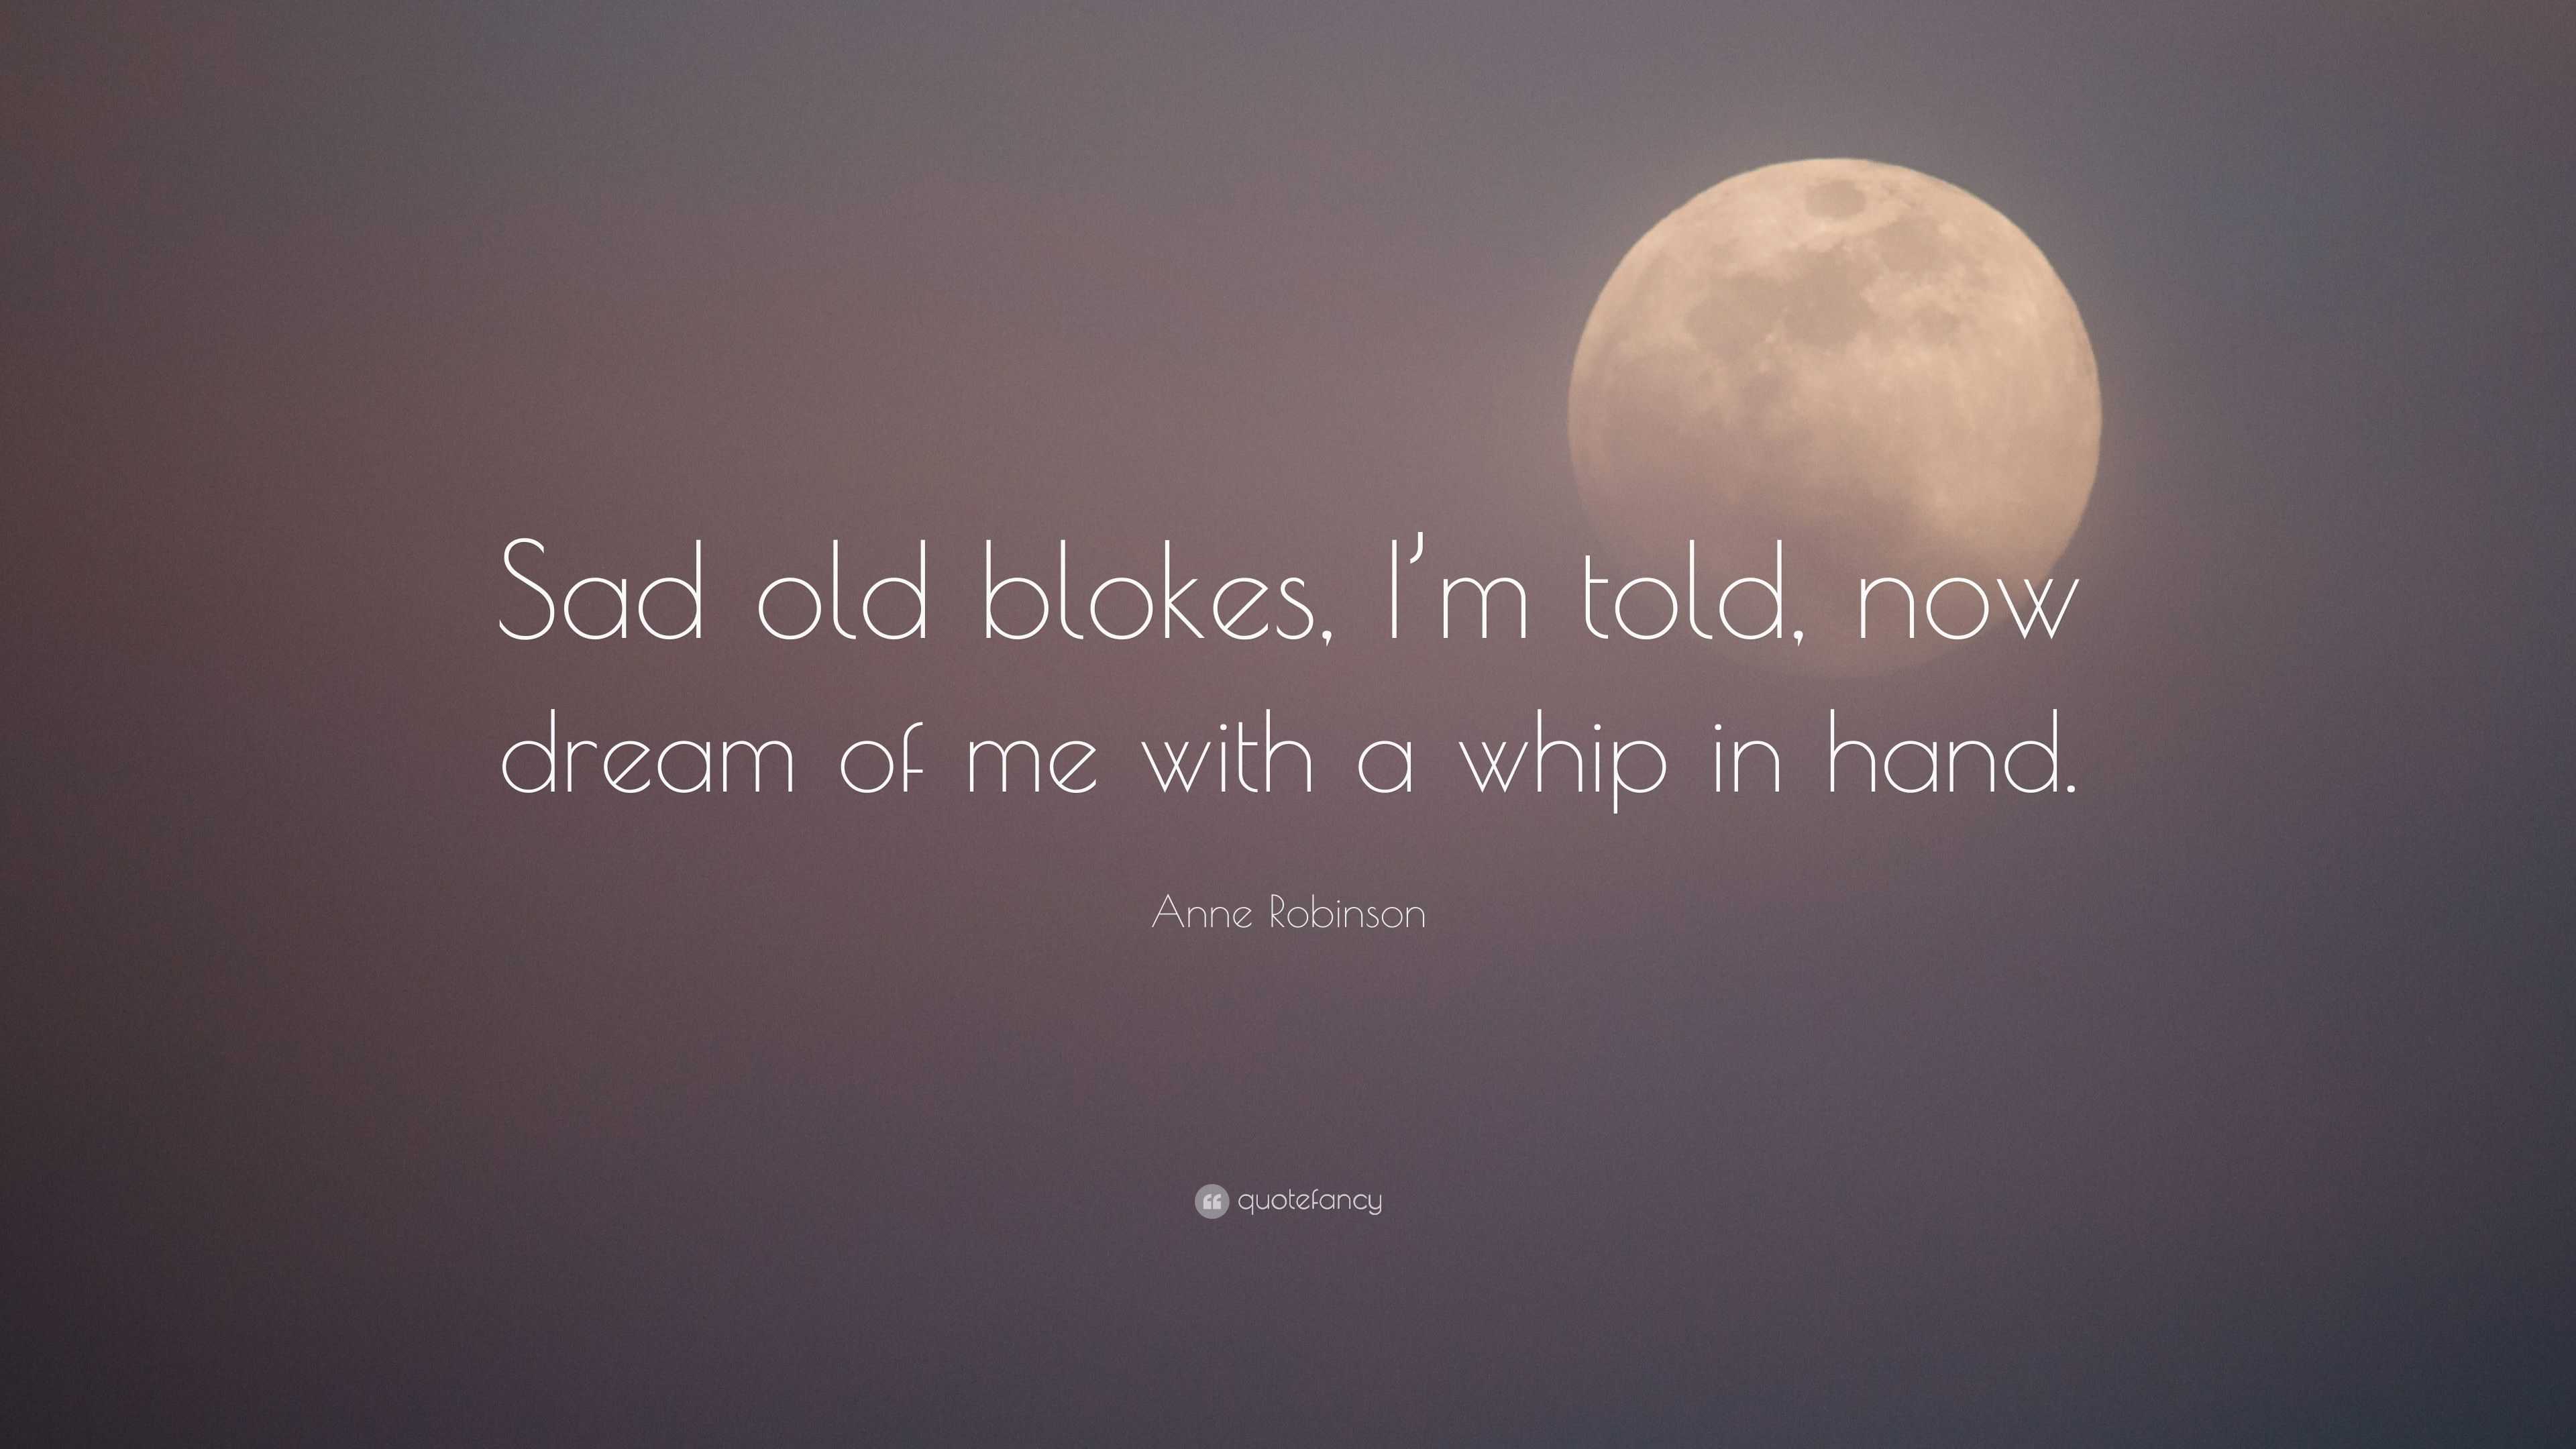 Anne Robinson Quote: “Sad old blokes, I'm told, now dream of me ...